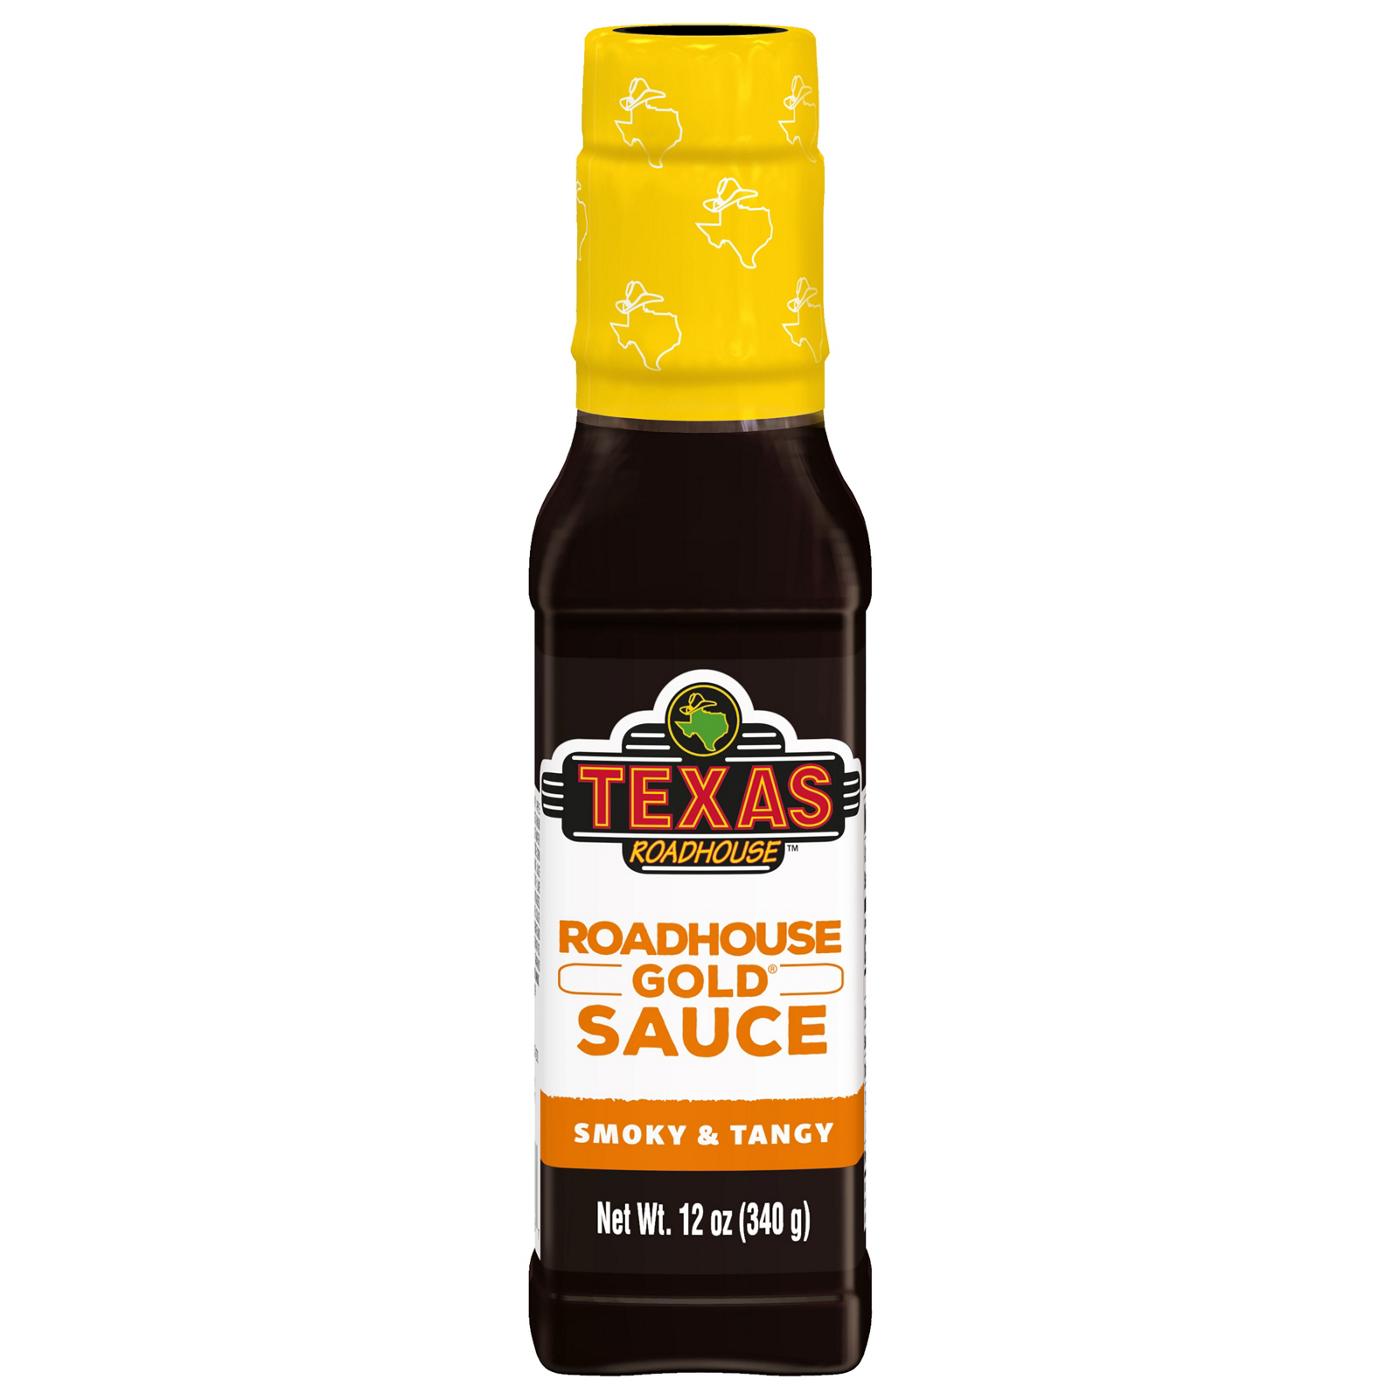 Texas Roadhouse Gold Sauce; image 1 of 2